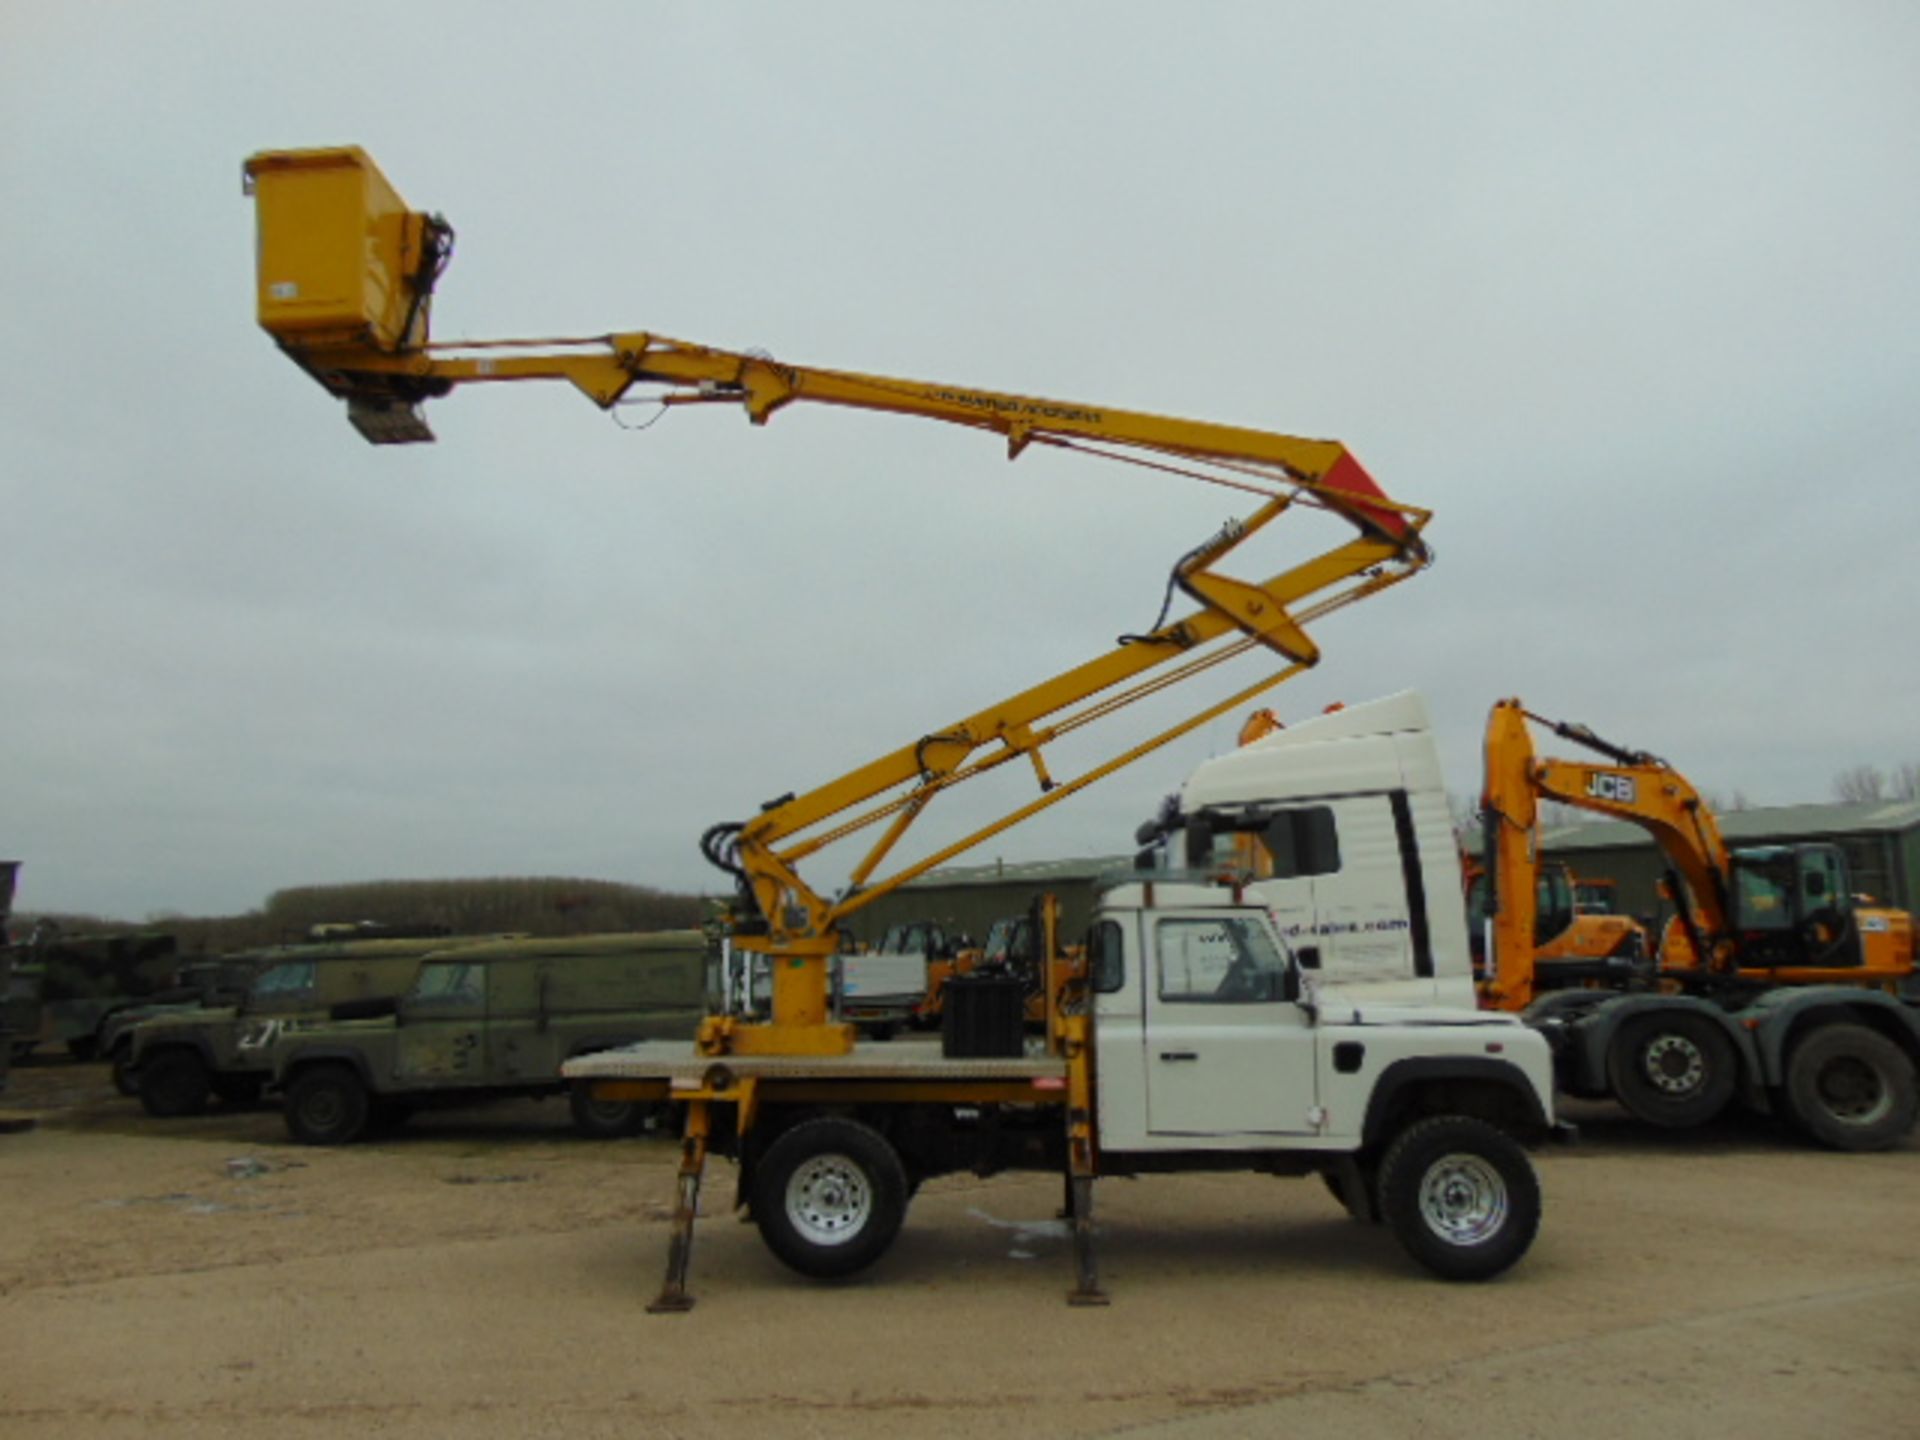 Land Rover Defender 130 TD5 Cherry Picker / Access Lift - Image 2 of 22